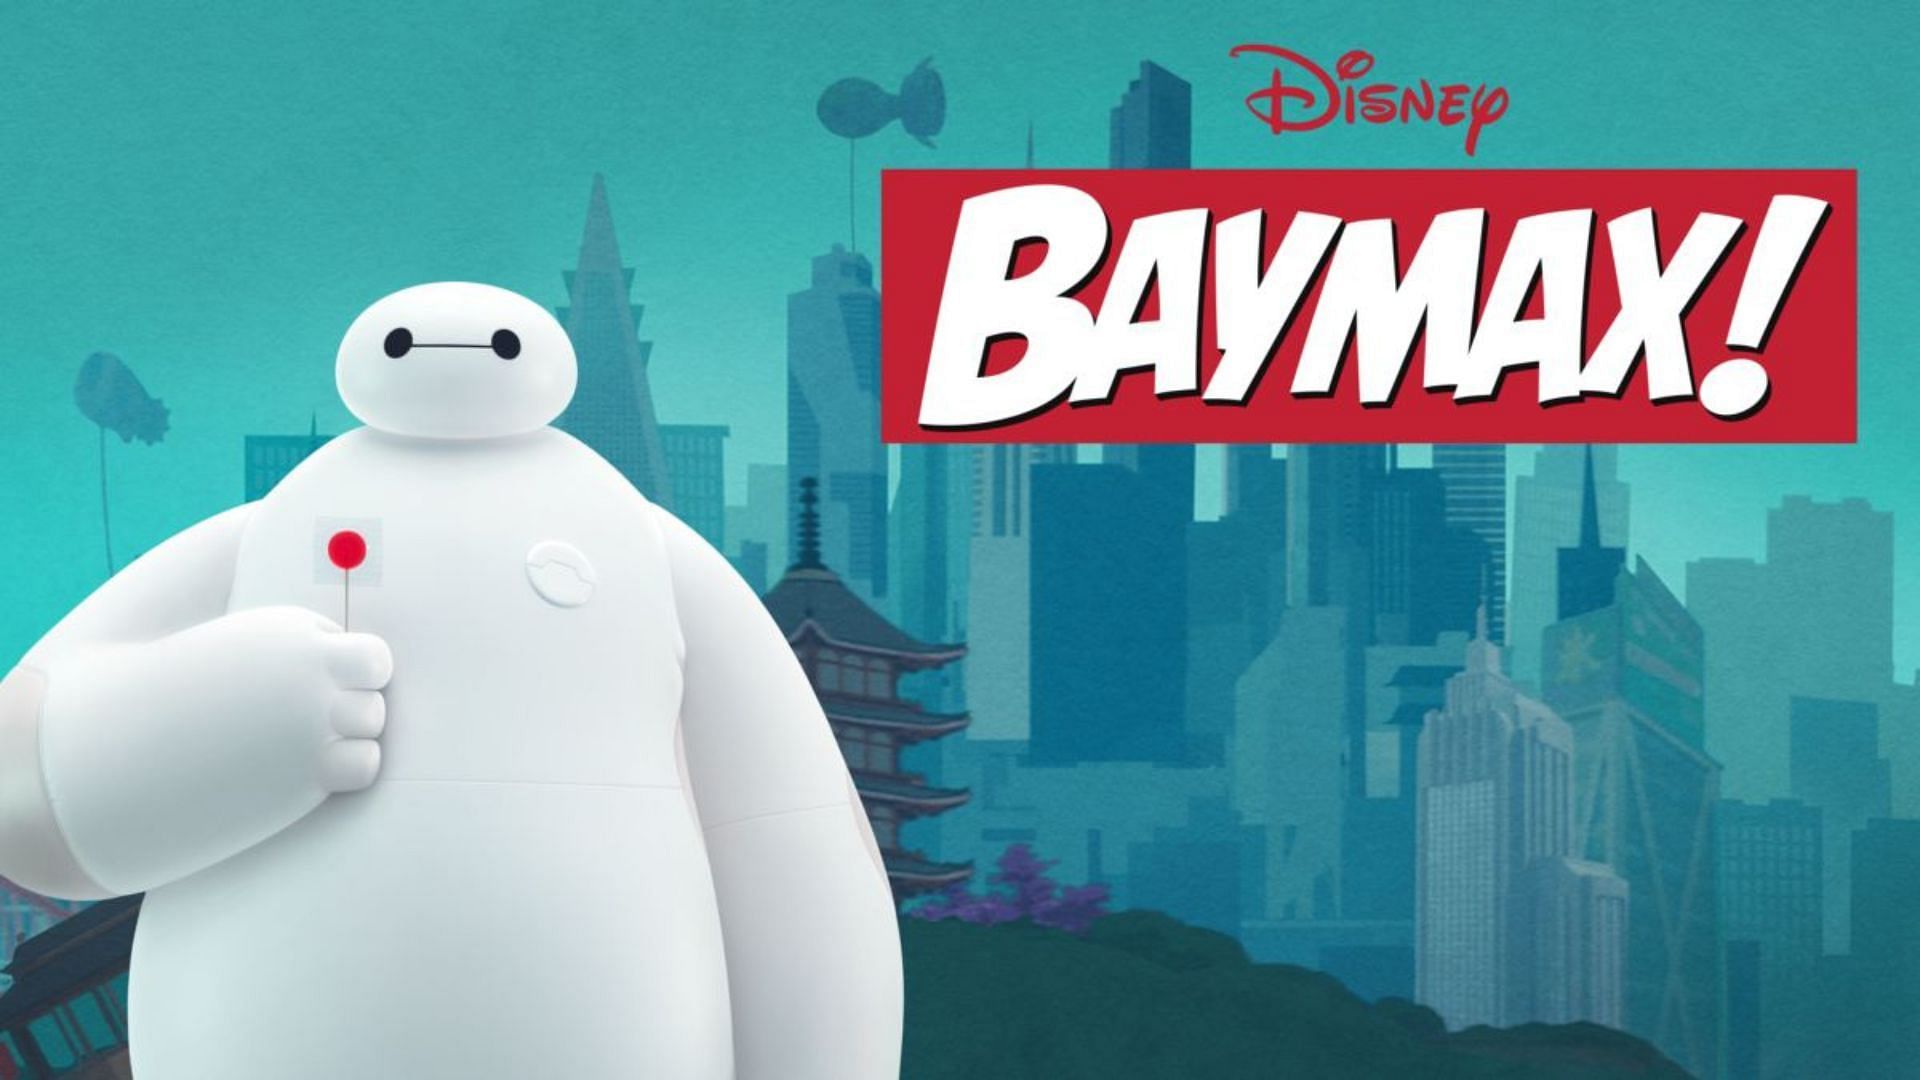 Baymax!, a Big Hero 6 spinoff miniseries, is now available to stream on Disney+ Hotstar (Image via Disney+)